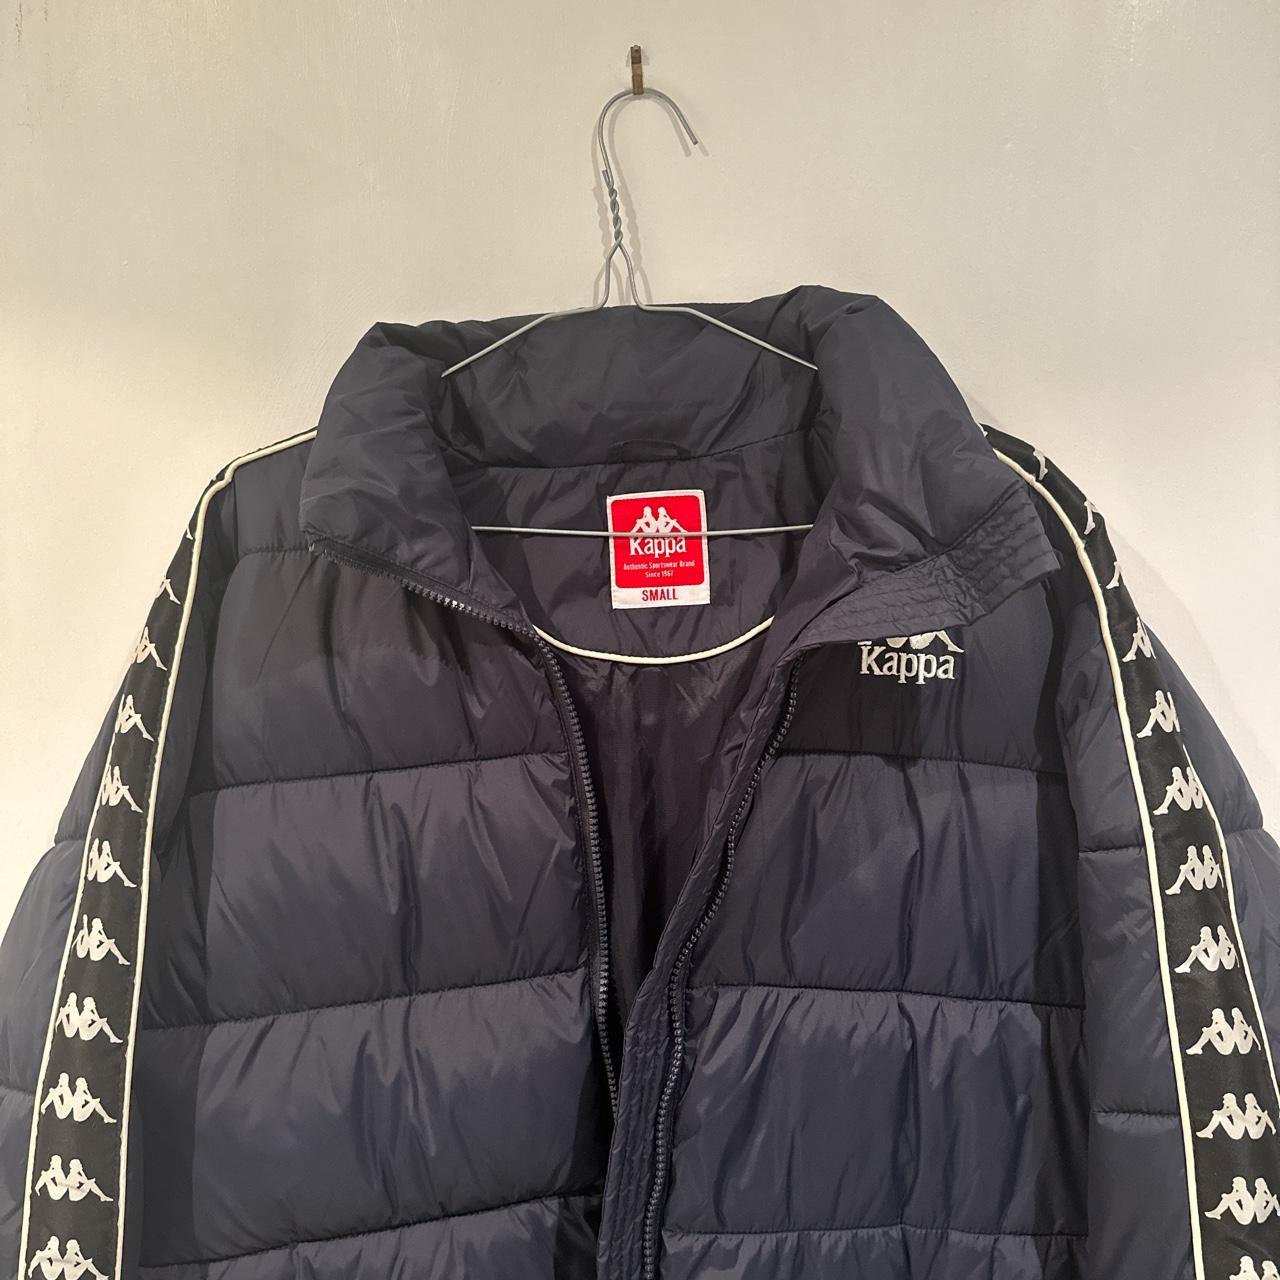 Kappa puffer jacket in navy blue with embroidered... - Depop